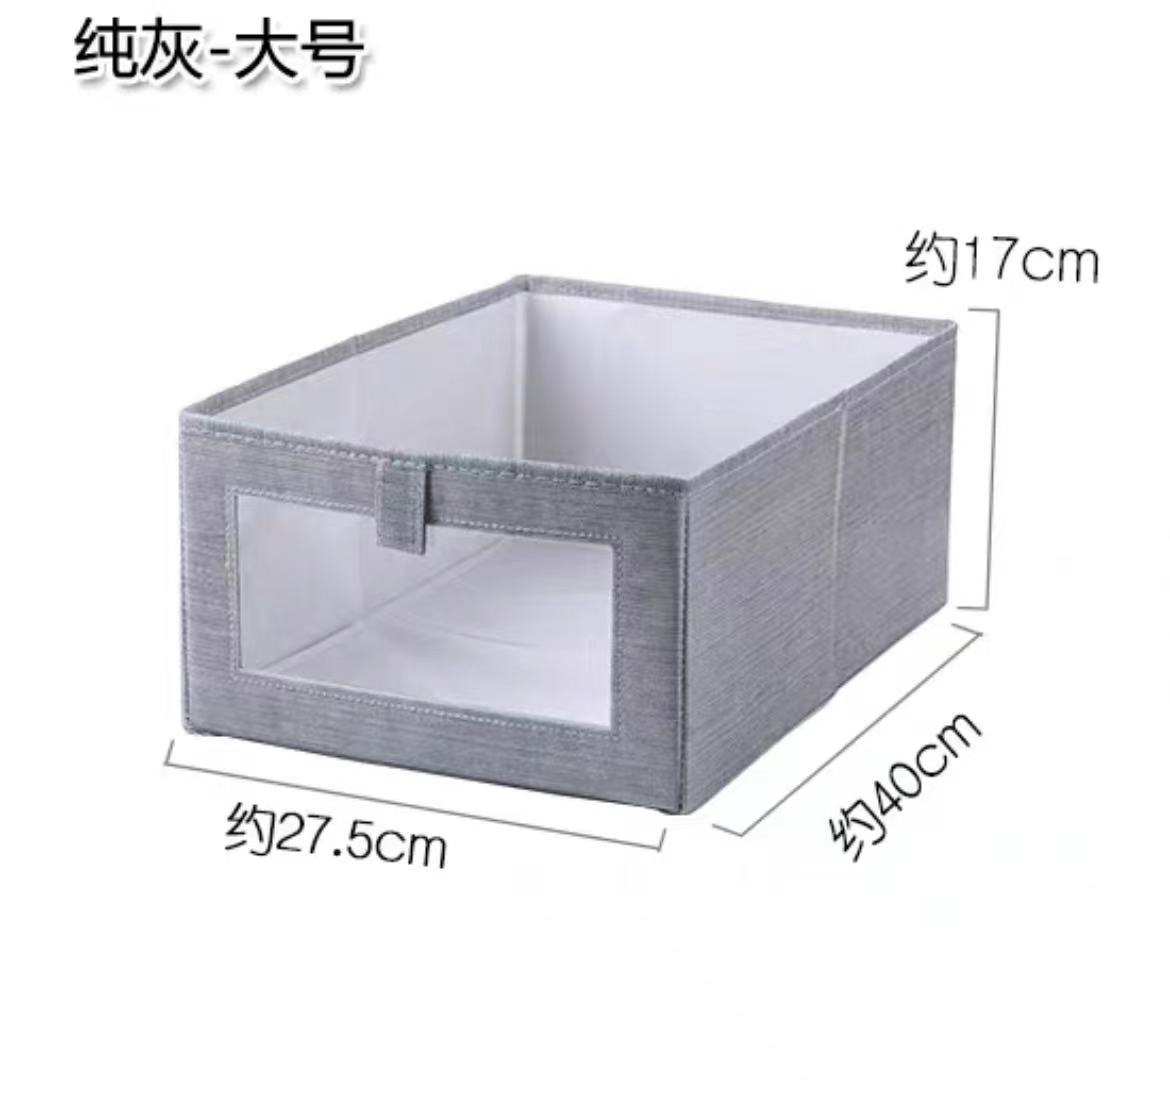 Japanese-Style Simple Non-Covered Storage Box Non-Woven Fabric Clothing Clutter Finishing Home Storage Box Storage Box Factory